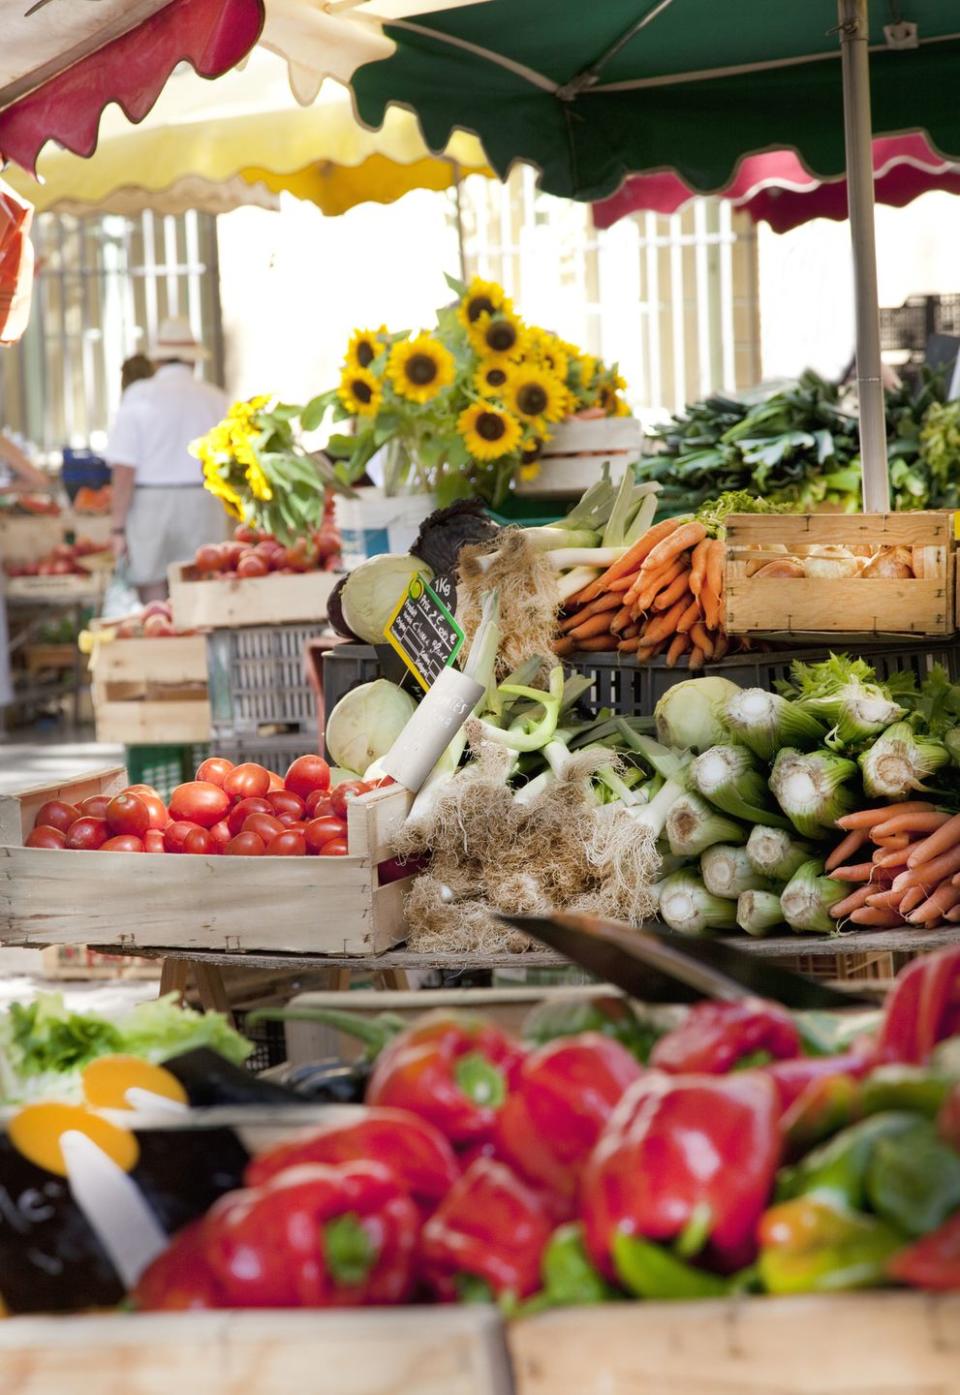 WITH YOUR MOM: Devour everything at the farmers' market.